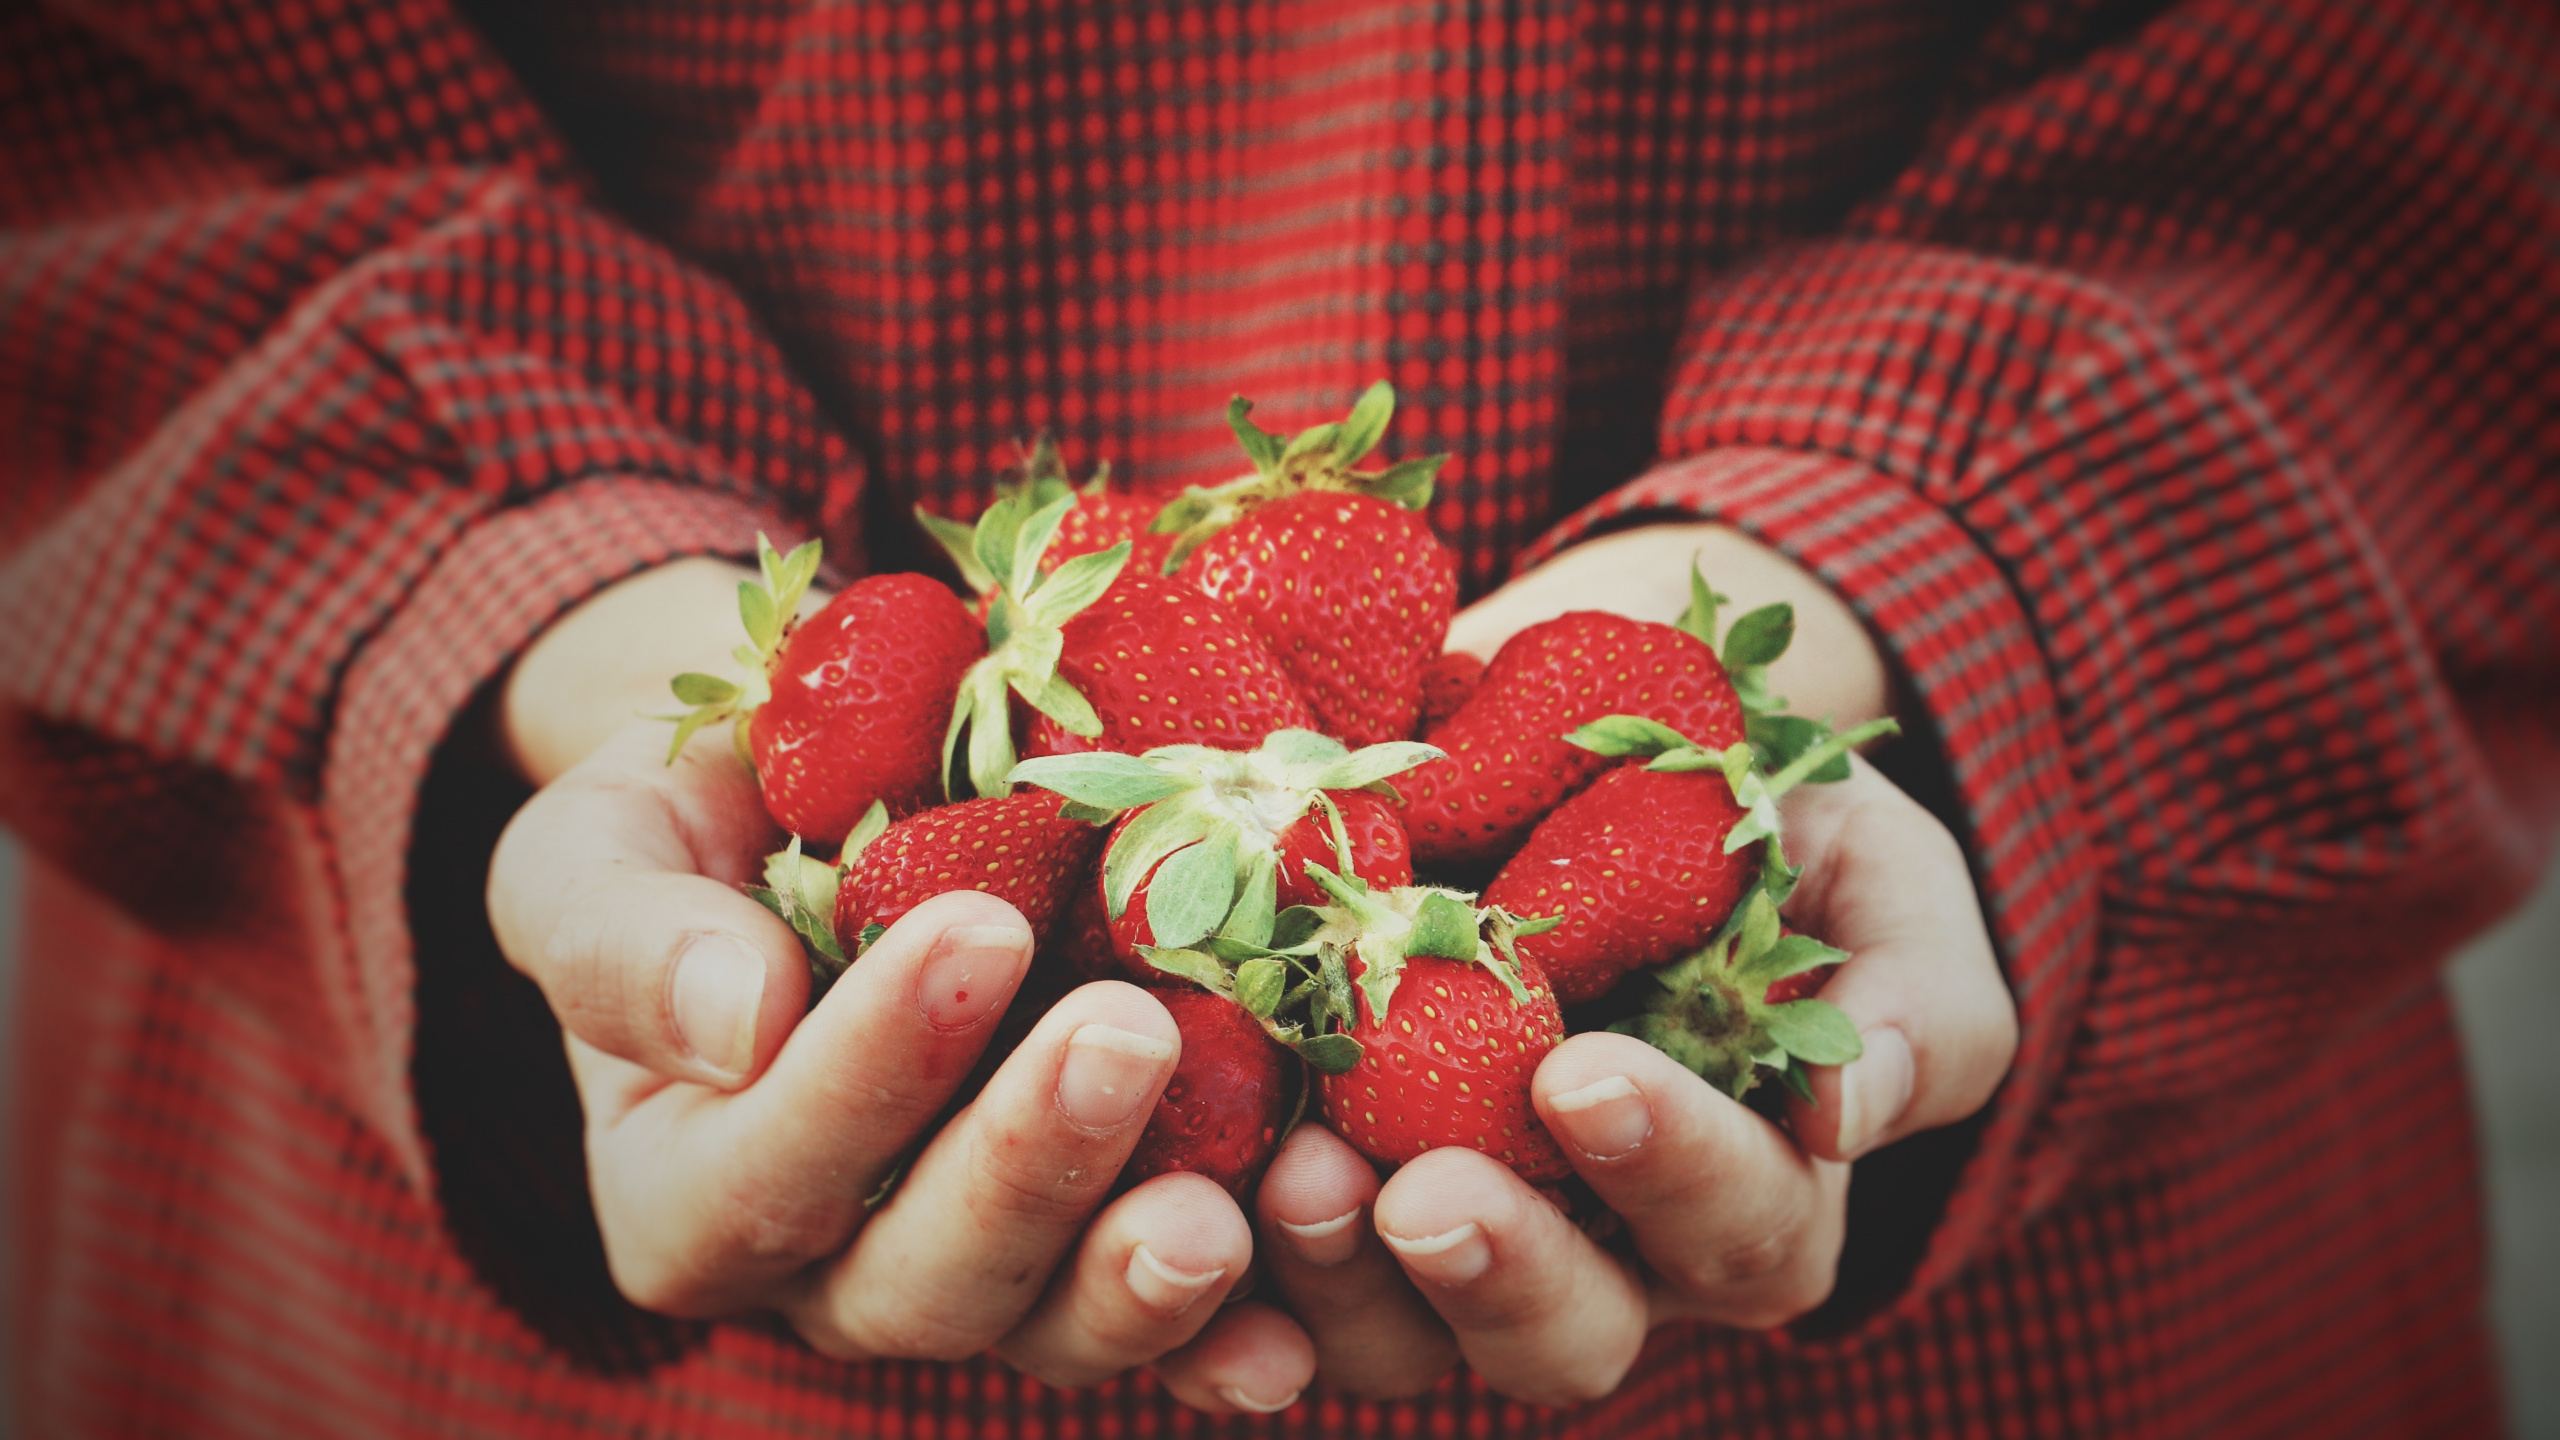 Person Holding Strawberries on Hand. Wallpaper in 2560x1440 Resolution